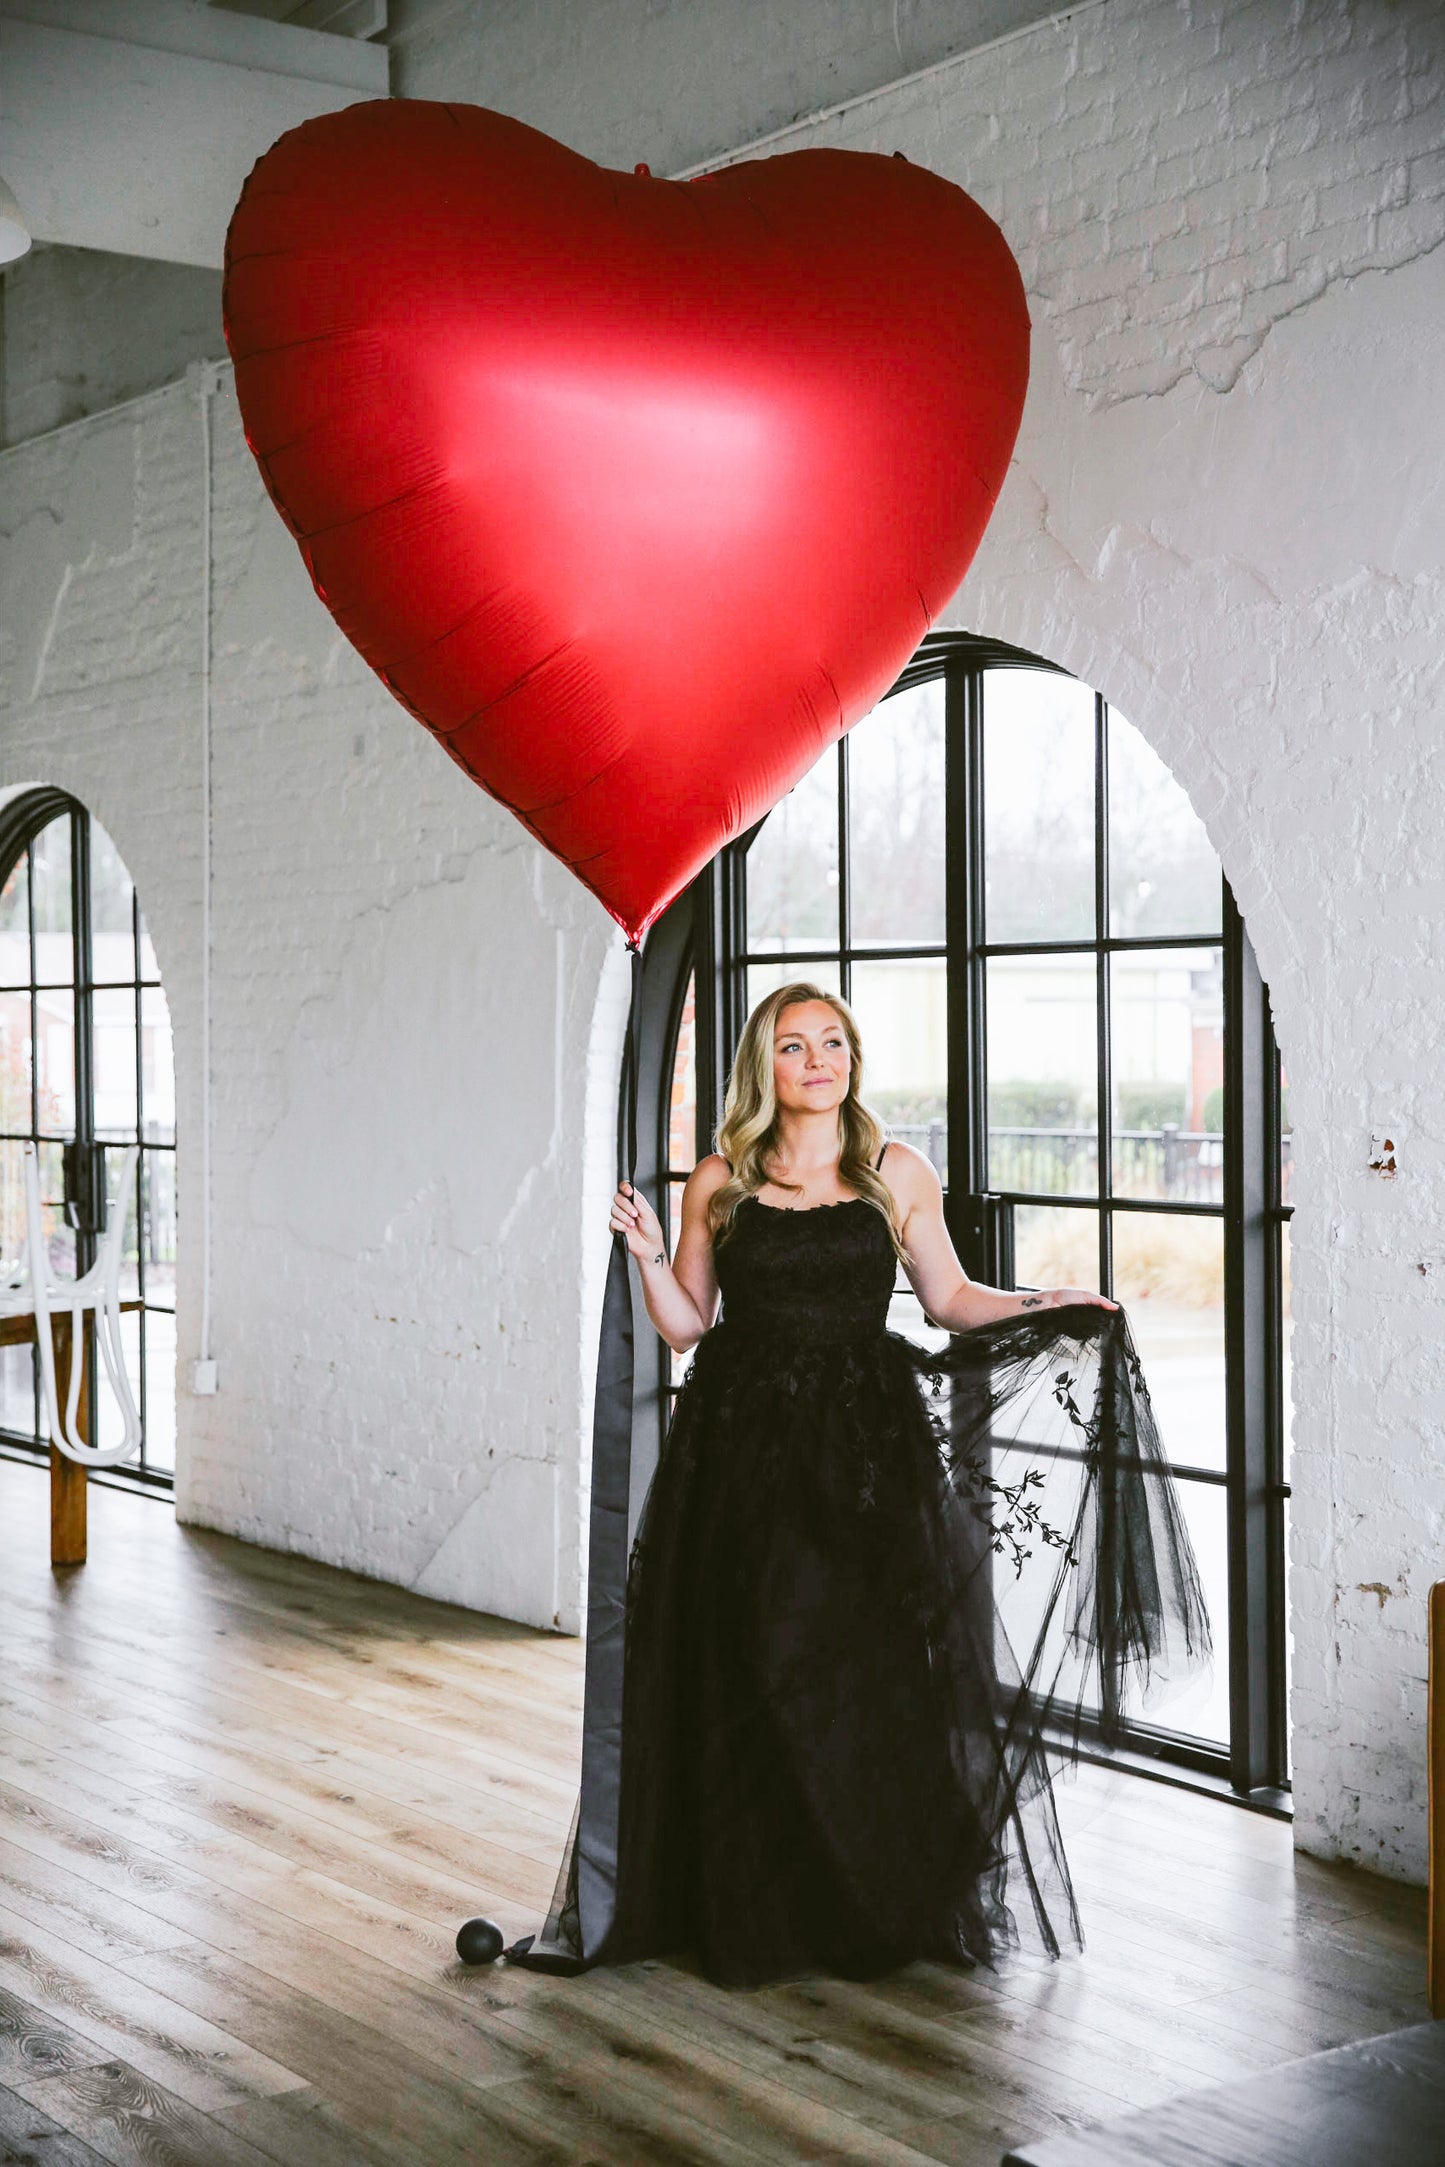 Madonna Black Tulle Gown - Size 4 (can possibly be ordered in other sizes)